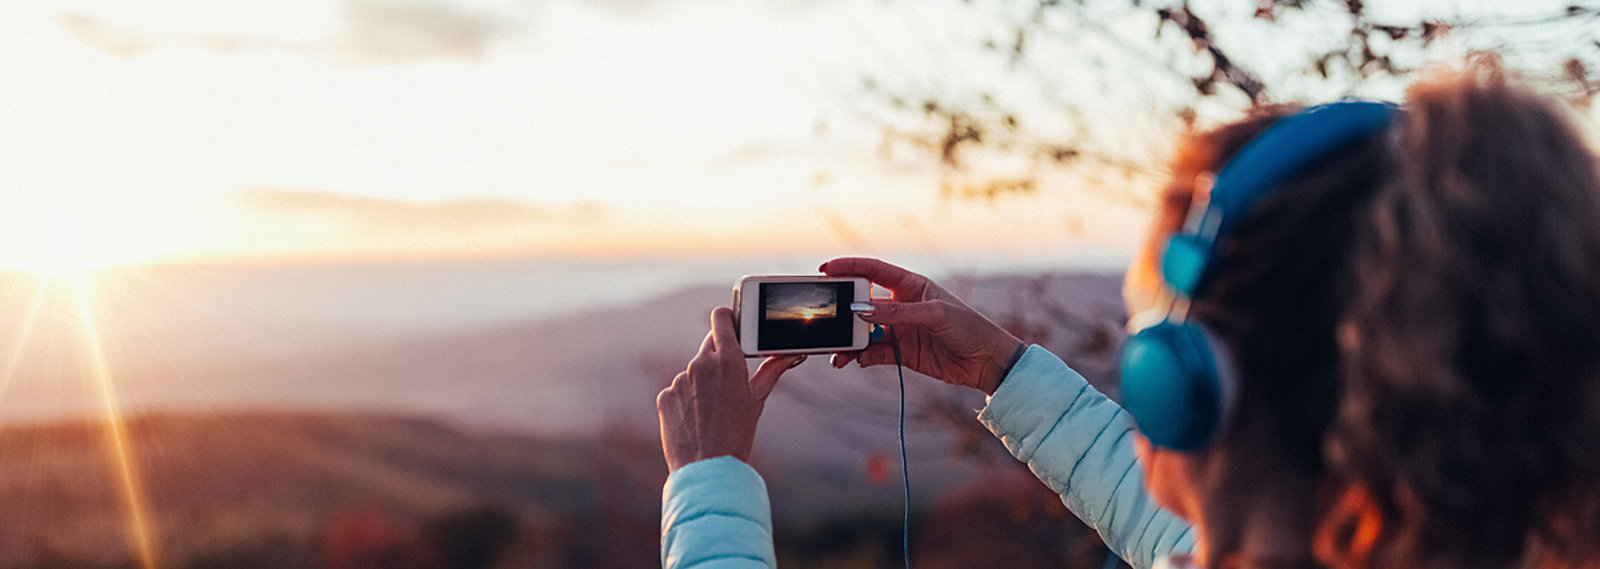 girl taking photo of sunset with smartphone